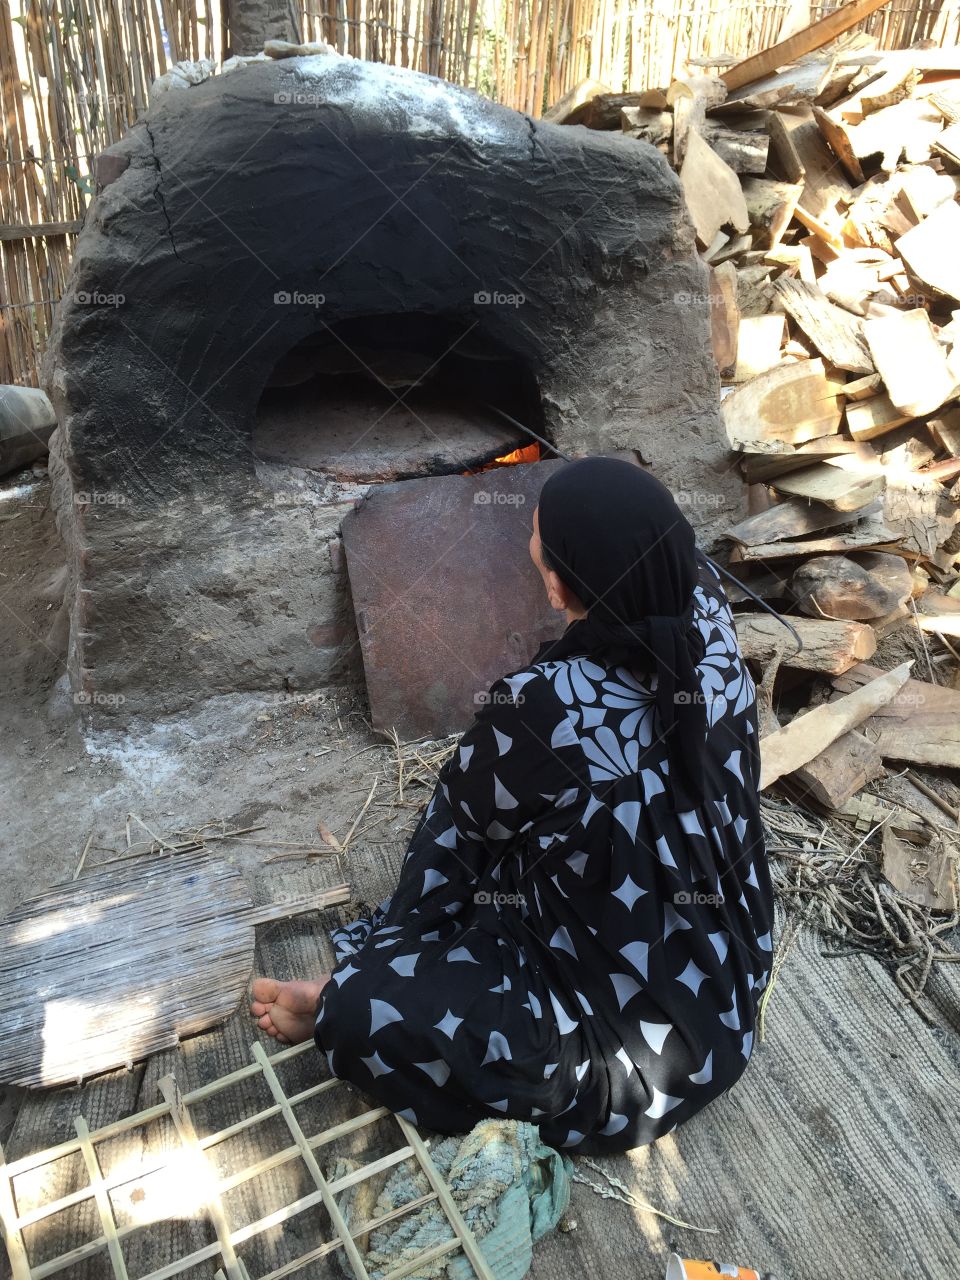 Egyptian woman baking traditional bread in mud oven 